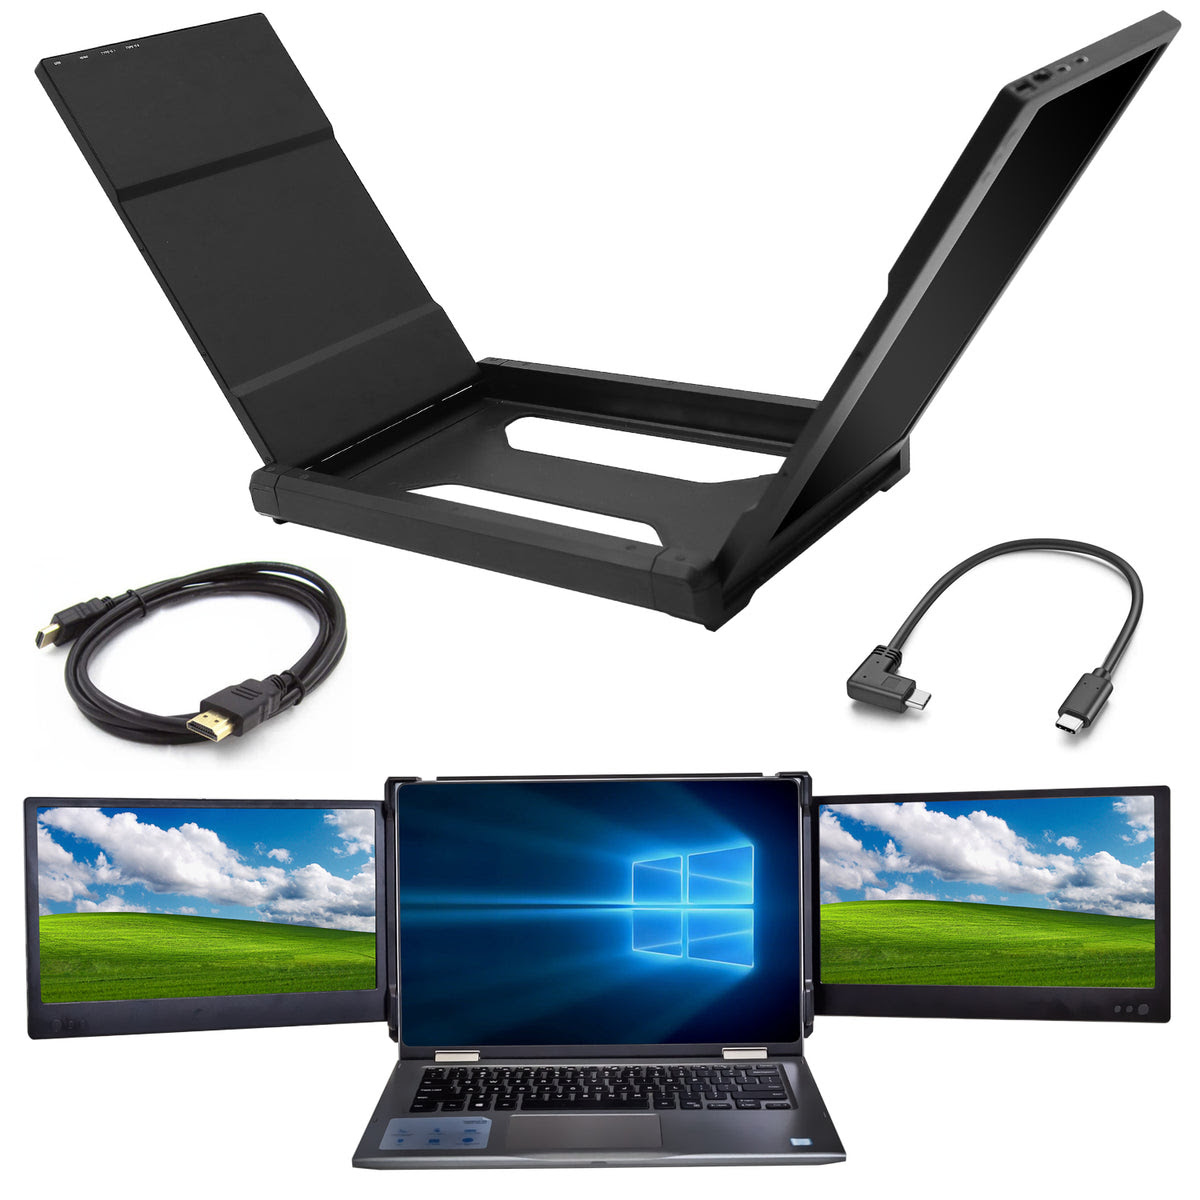 As a gamer, when you play a game in one monitor, it does not allow you to see more stuff. Tps Dual Triple Portable Extended Laptop Screen Extender 11 6 Monitor Tps Power Sports